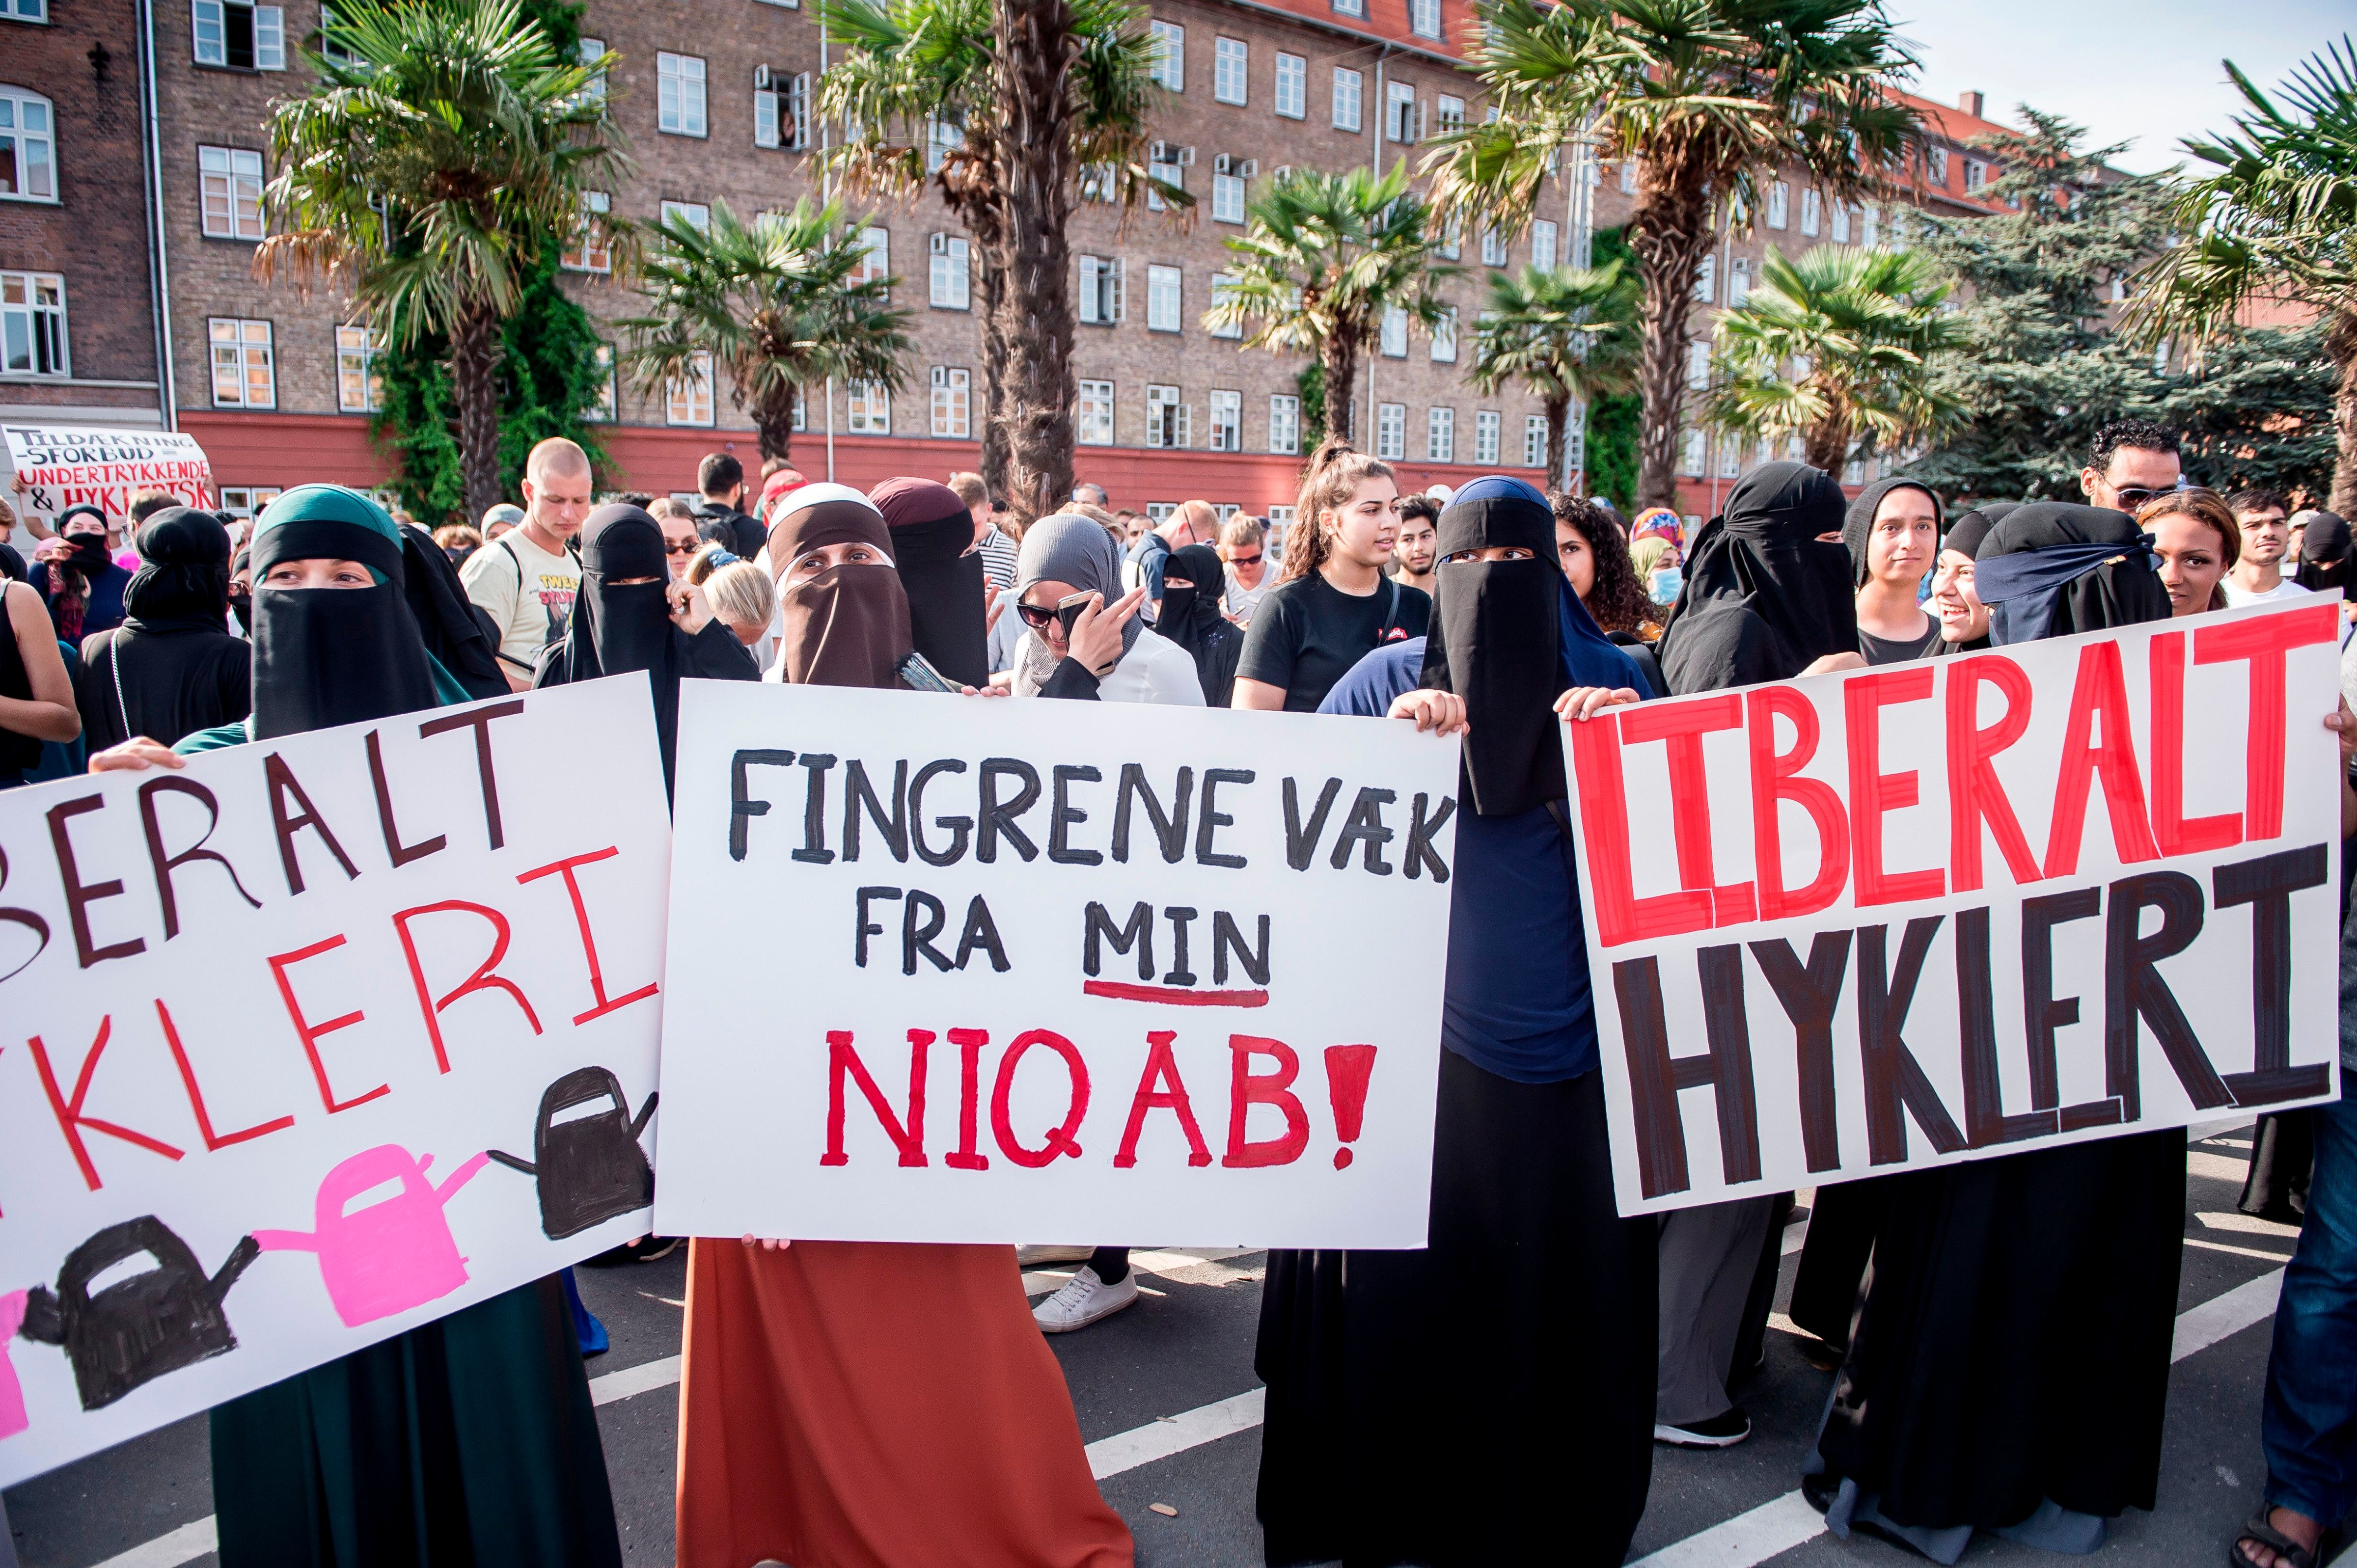 Women wearing niqabs to veil their faces take part in a demonstration on August 1, 2018, the first day of the implementation of the Danish face veil ban, in Copenhagen, Denmark. (Mads Claus Rasmussen—AFP/Getty Images)